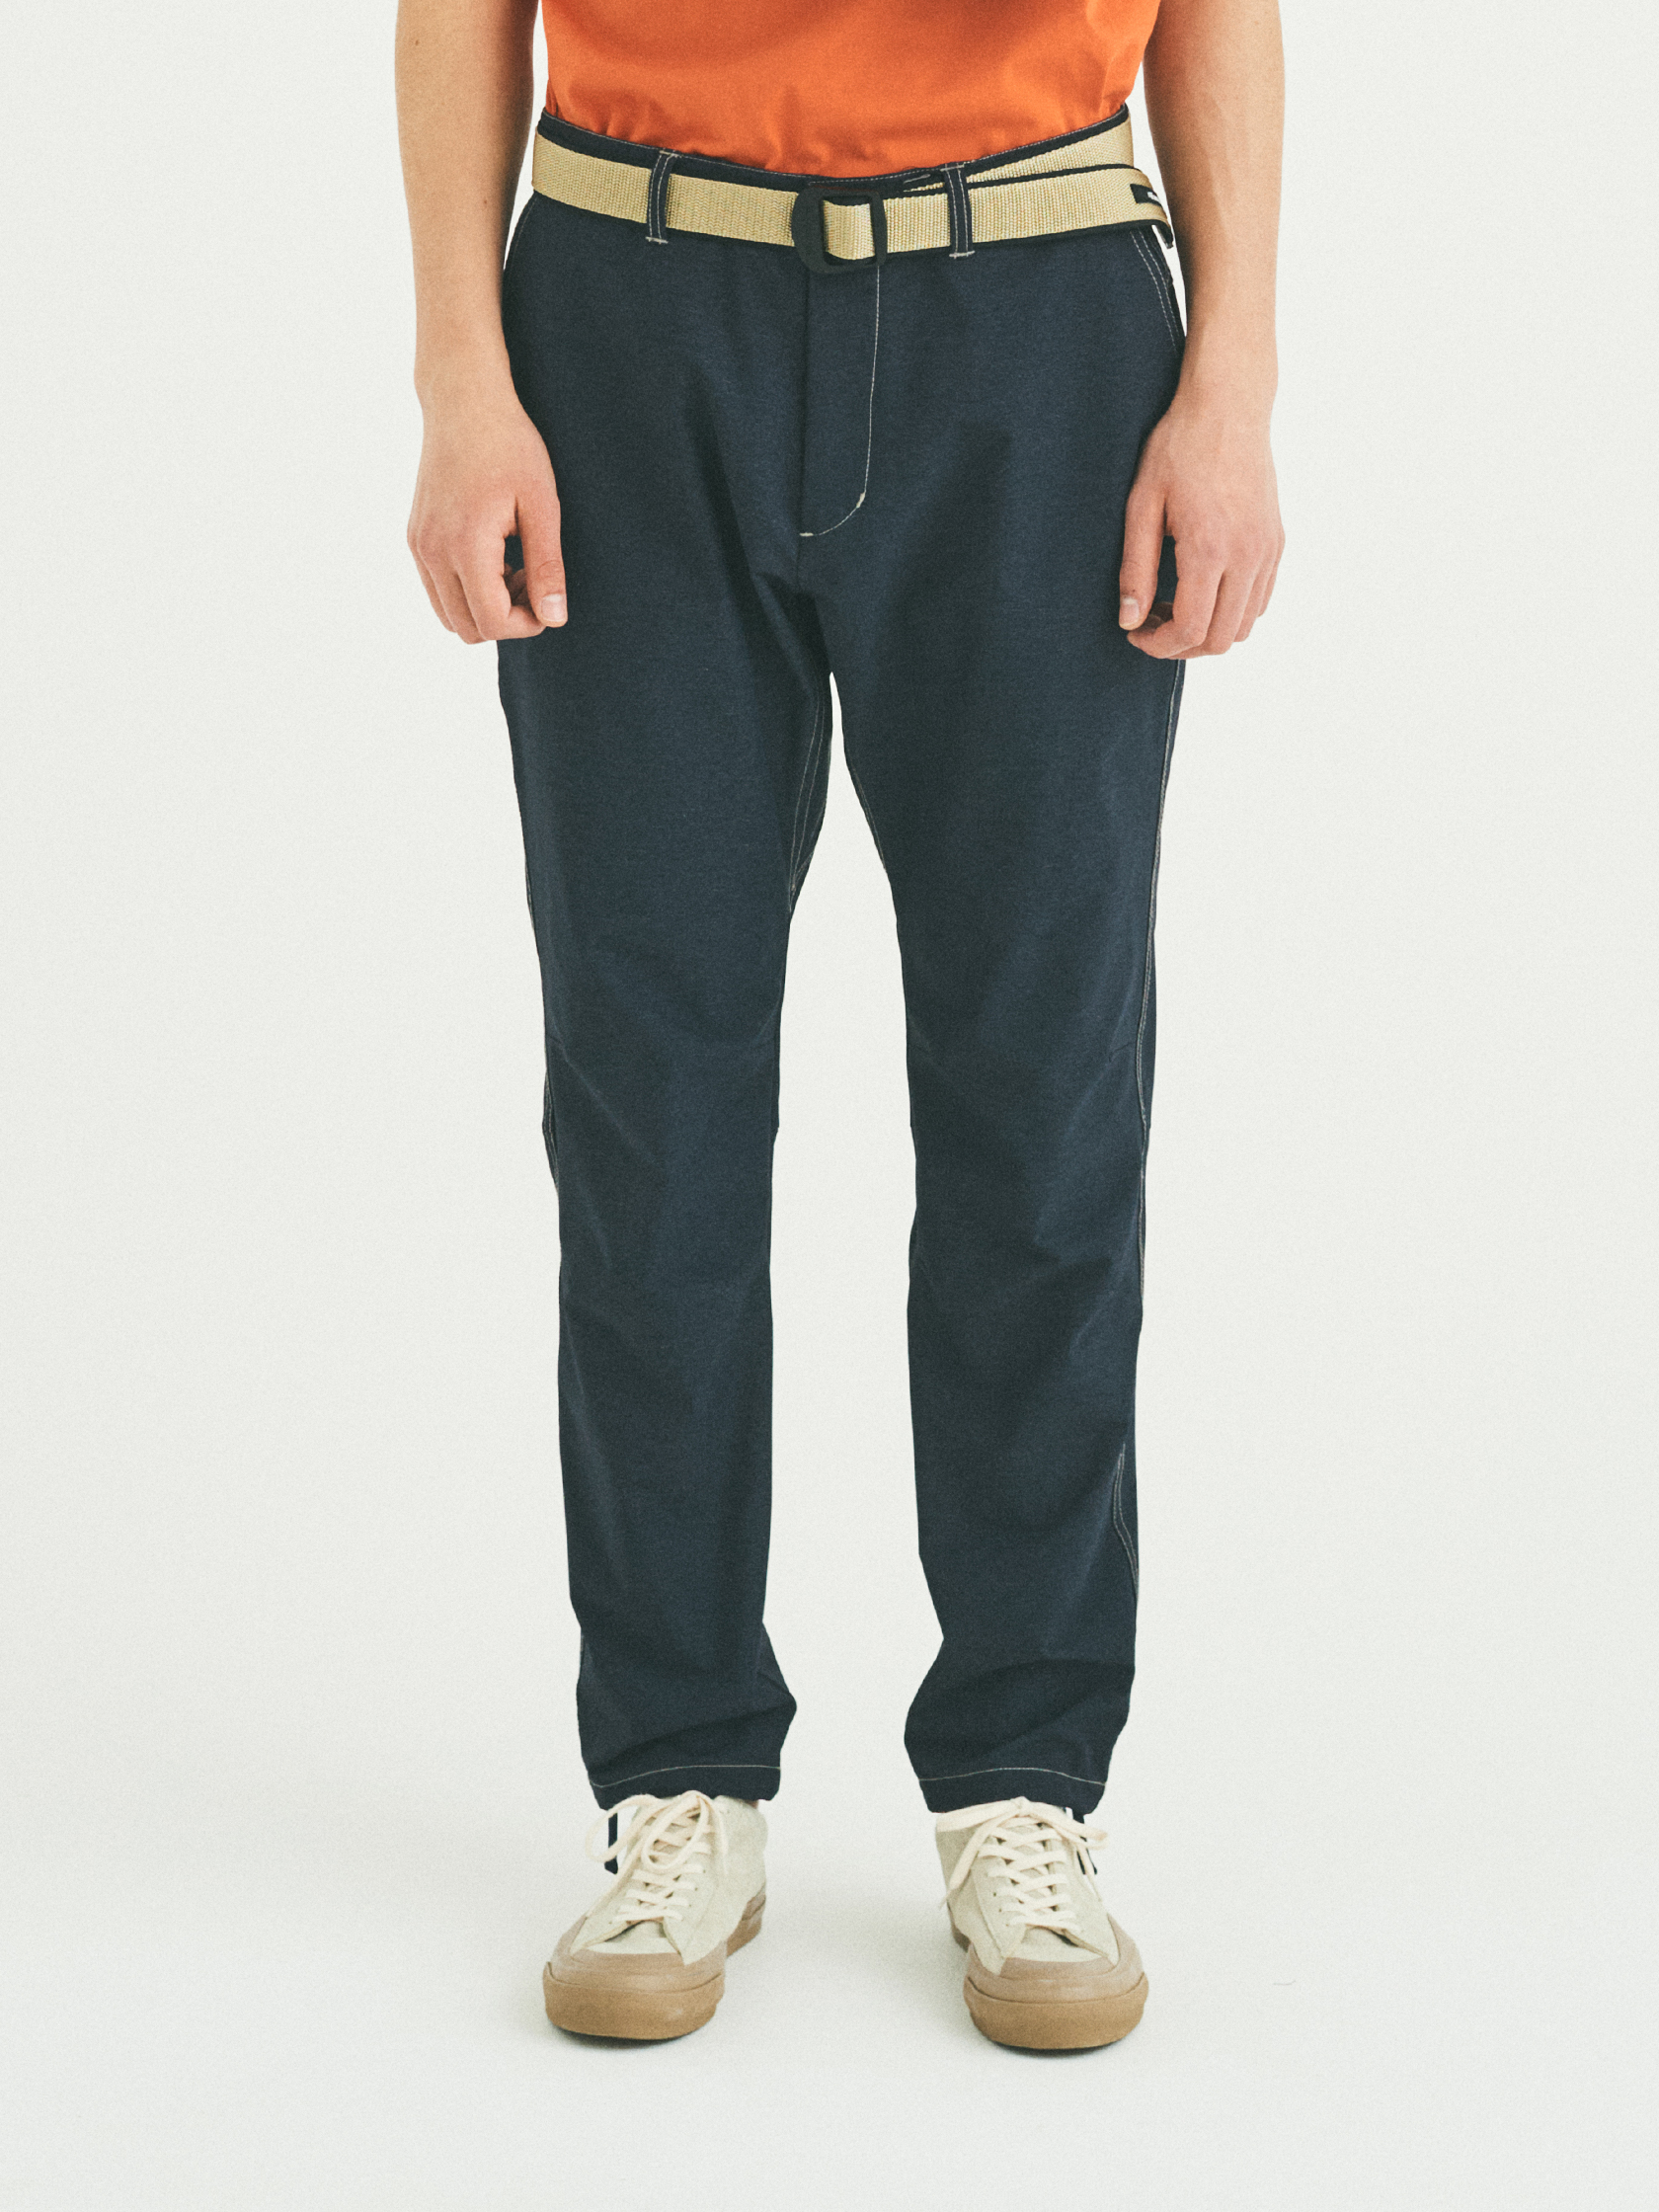 tapered stretch pants | karrimor カリマー | リュックサック 